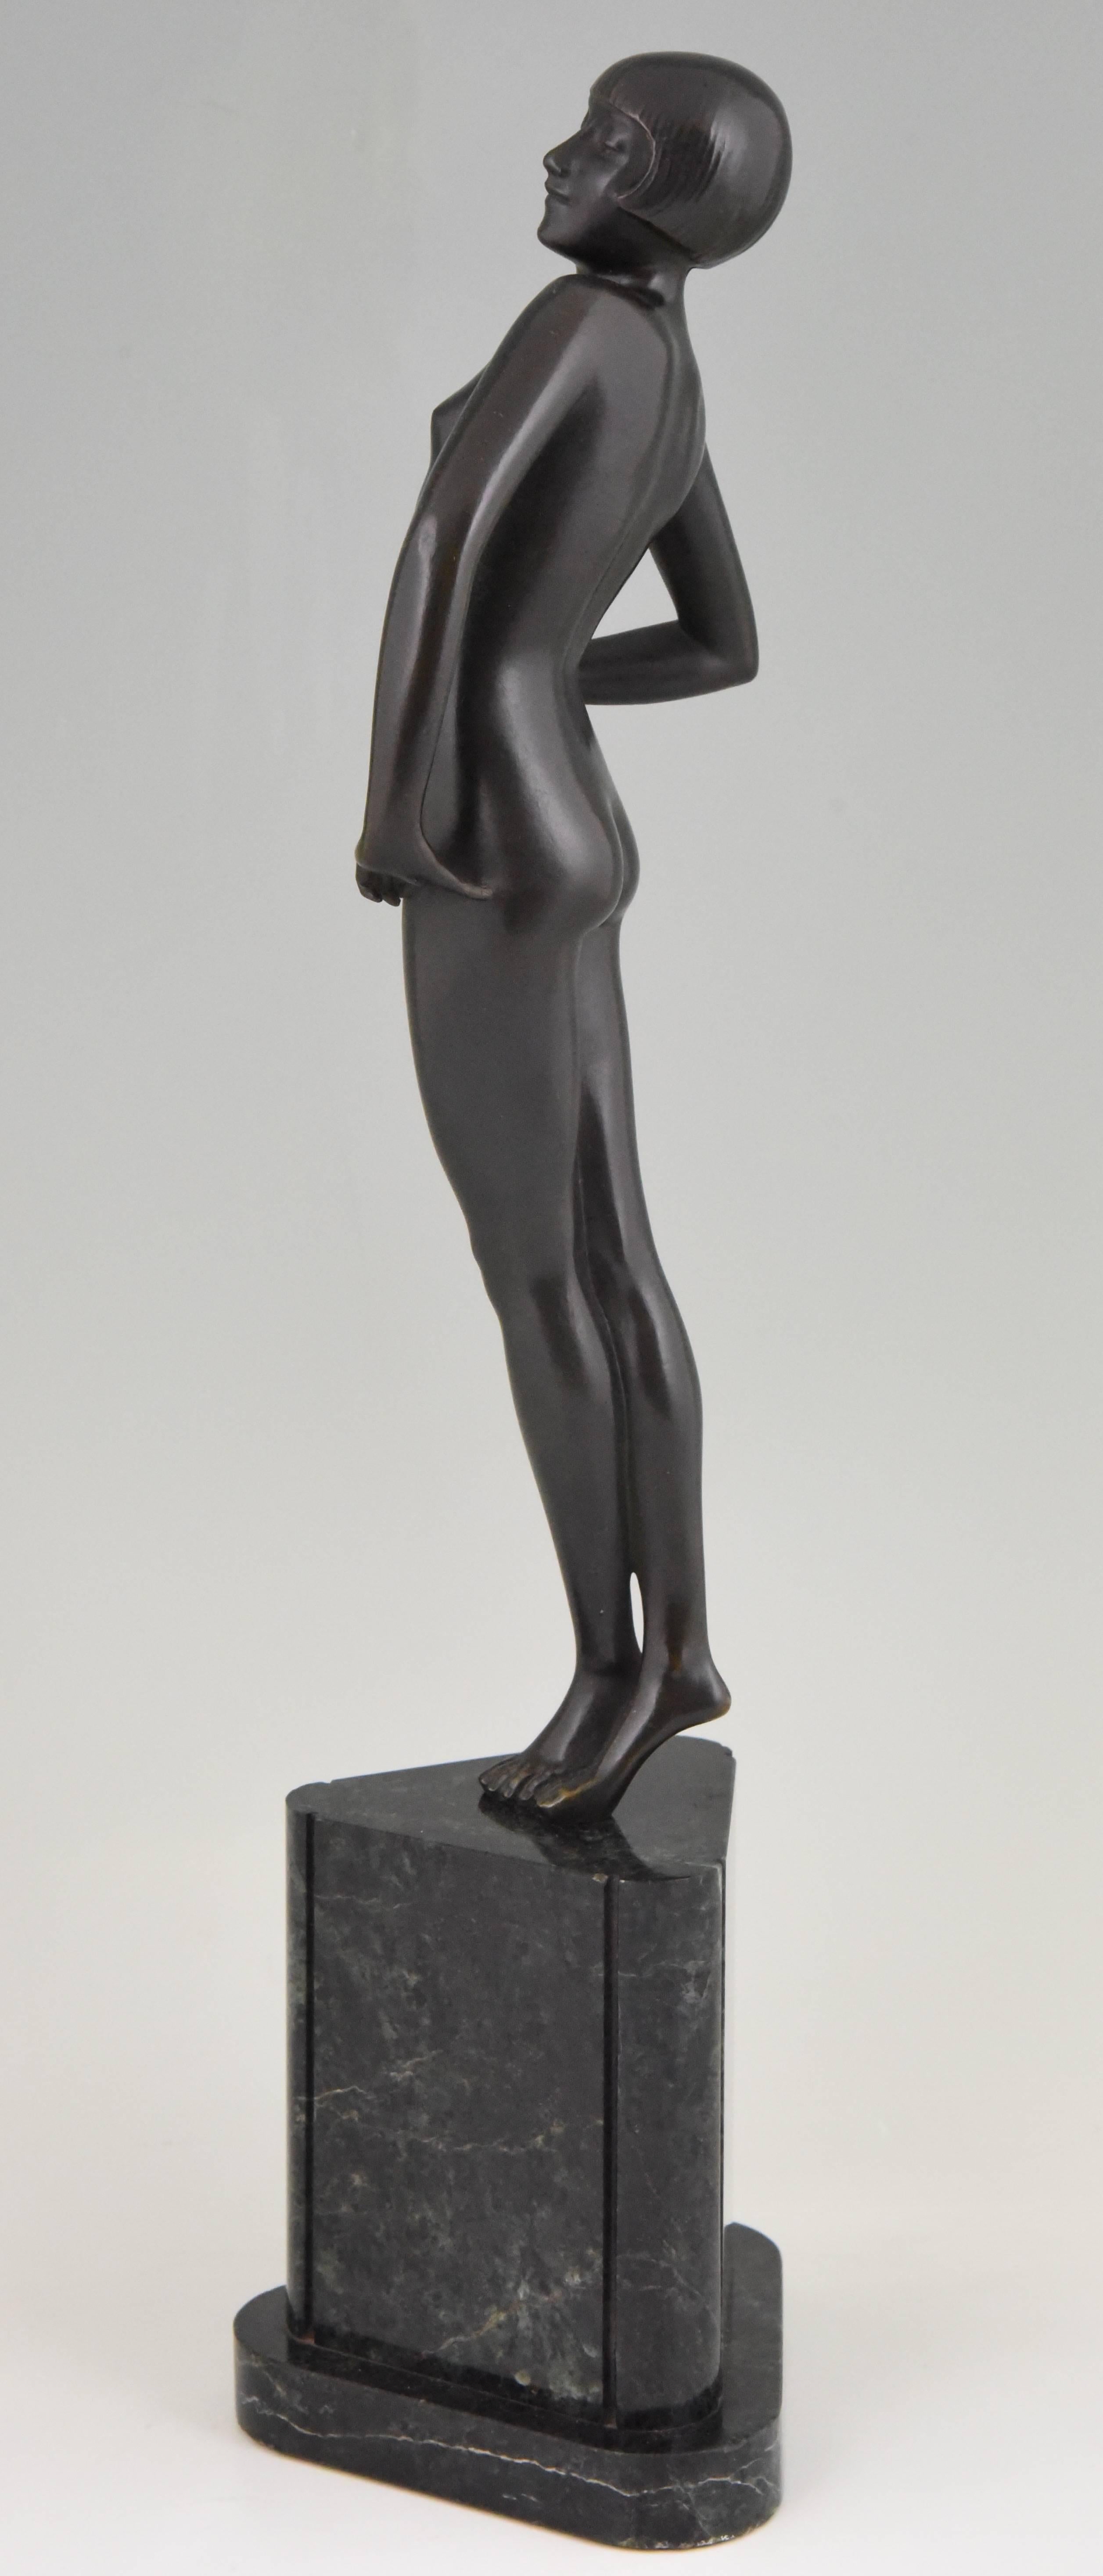 Early 20th Century Art Deco Bronze Sculpture Standing Nude Pride by Philippe Devriez, France, 1925